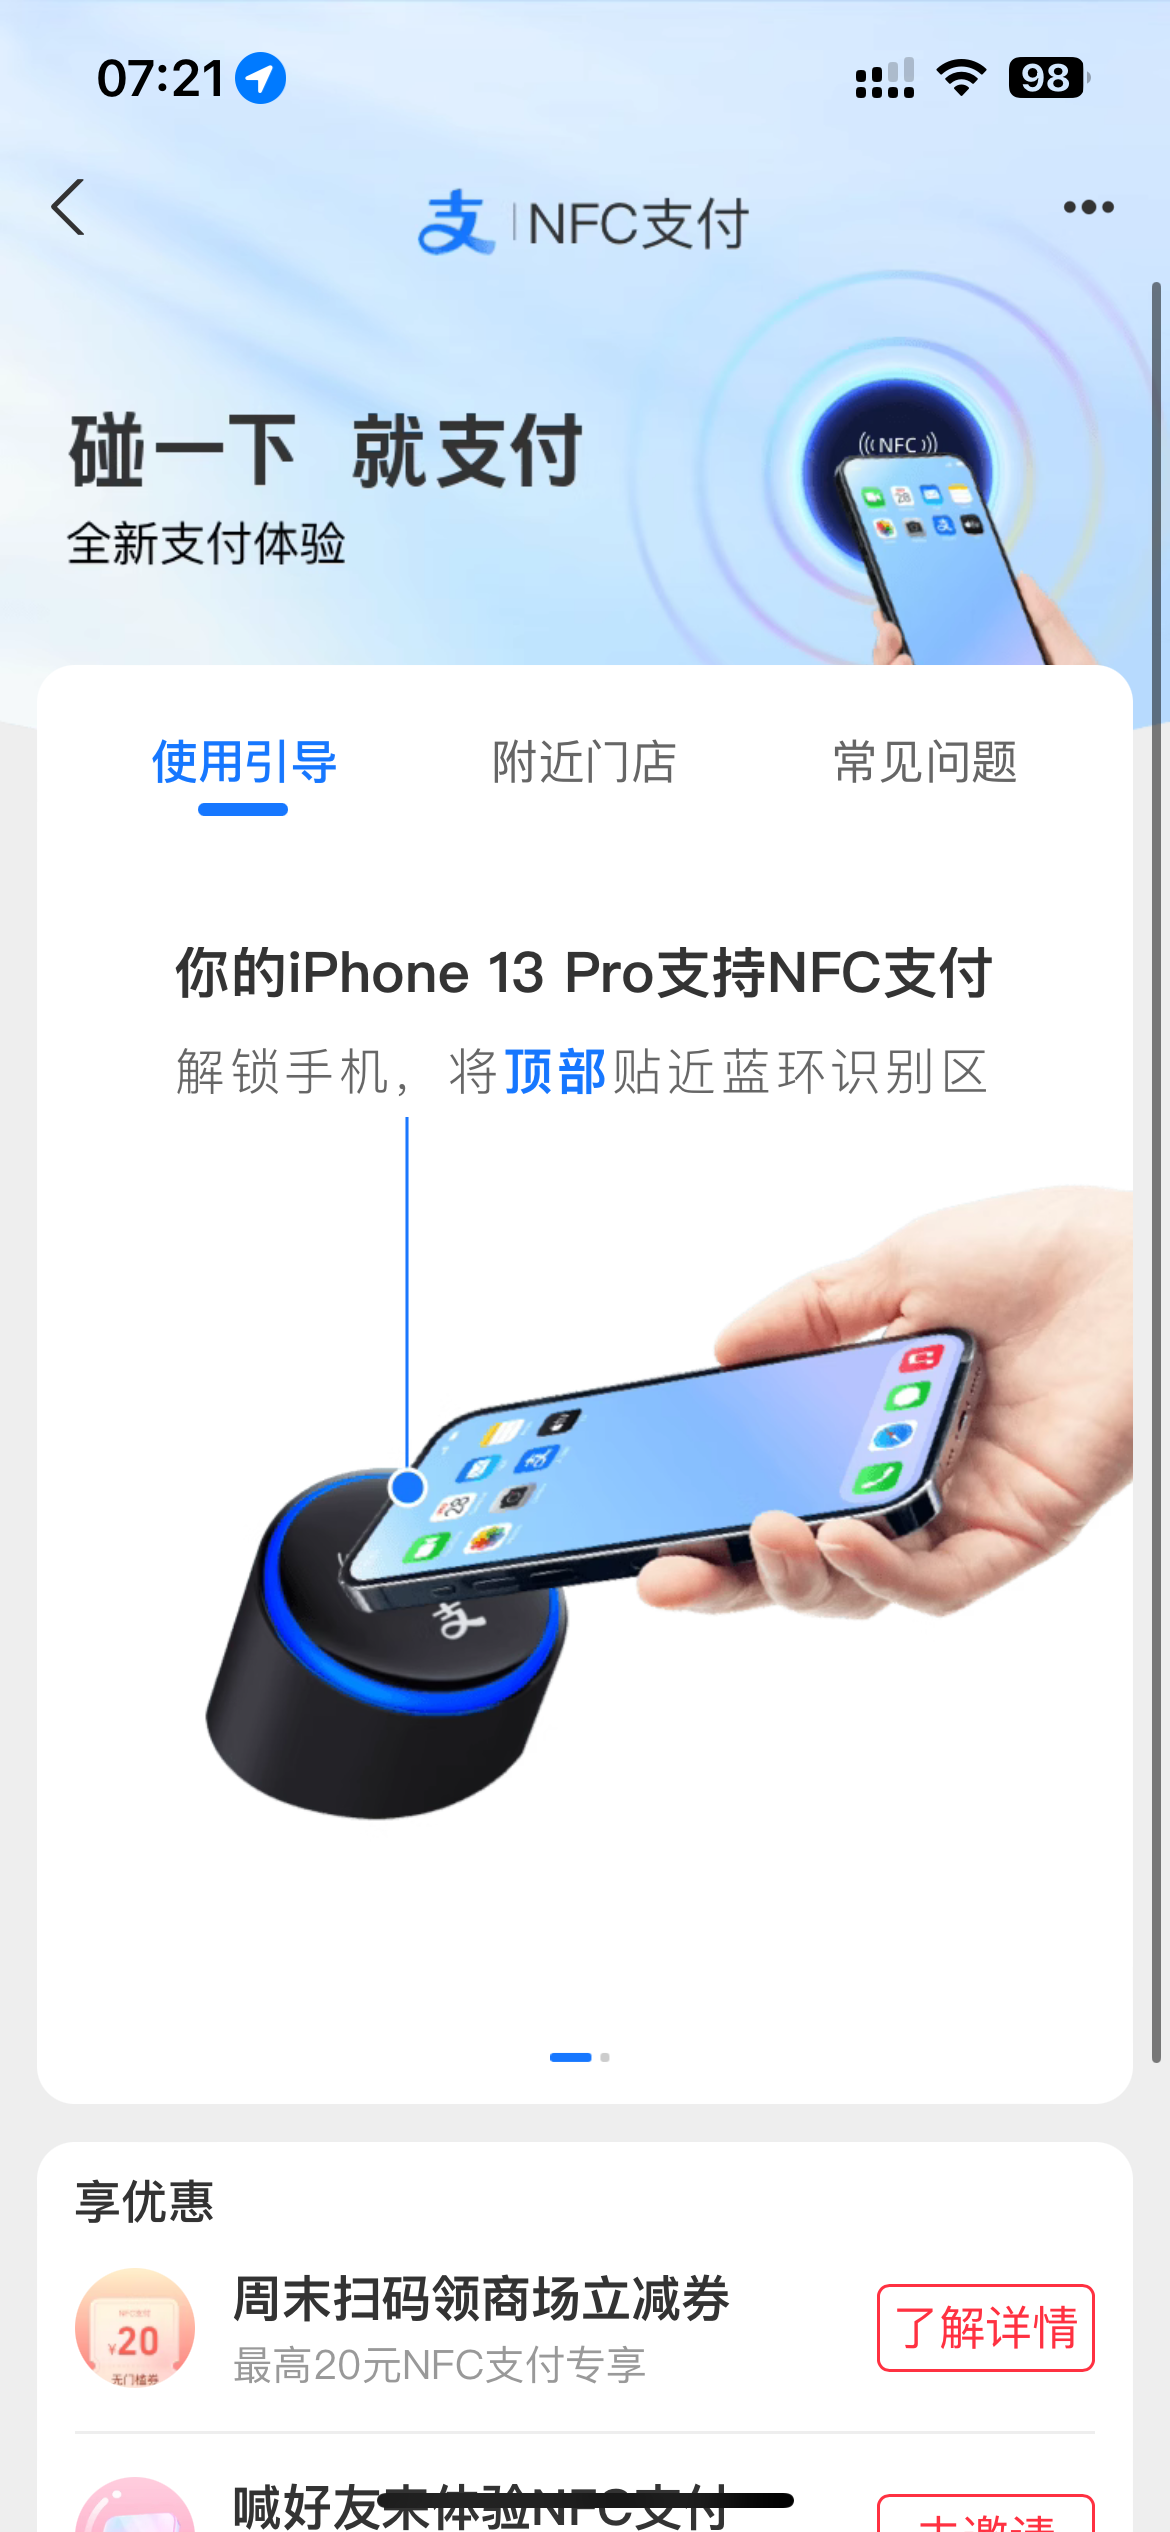 Alipay launches NFC tap-to-pay feature to streamline transaction process.